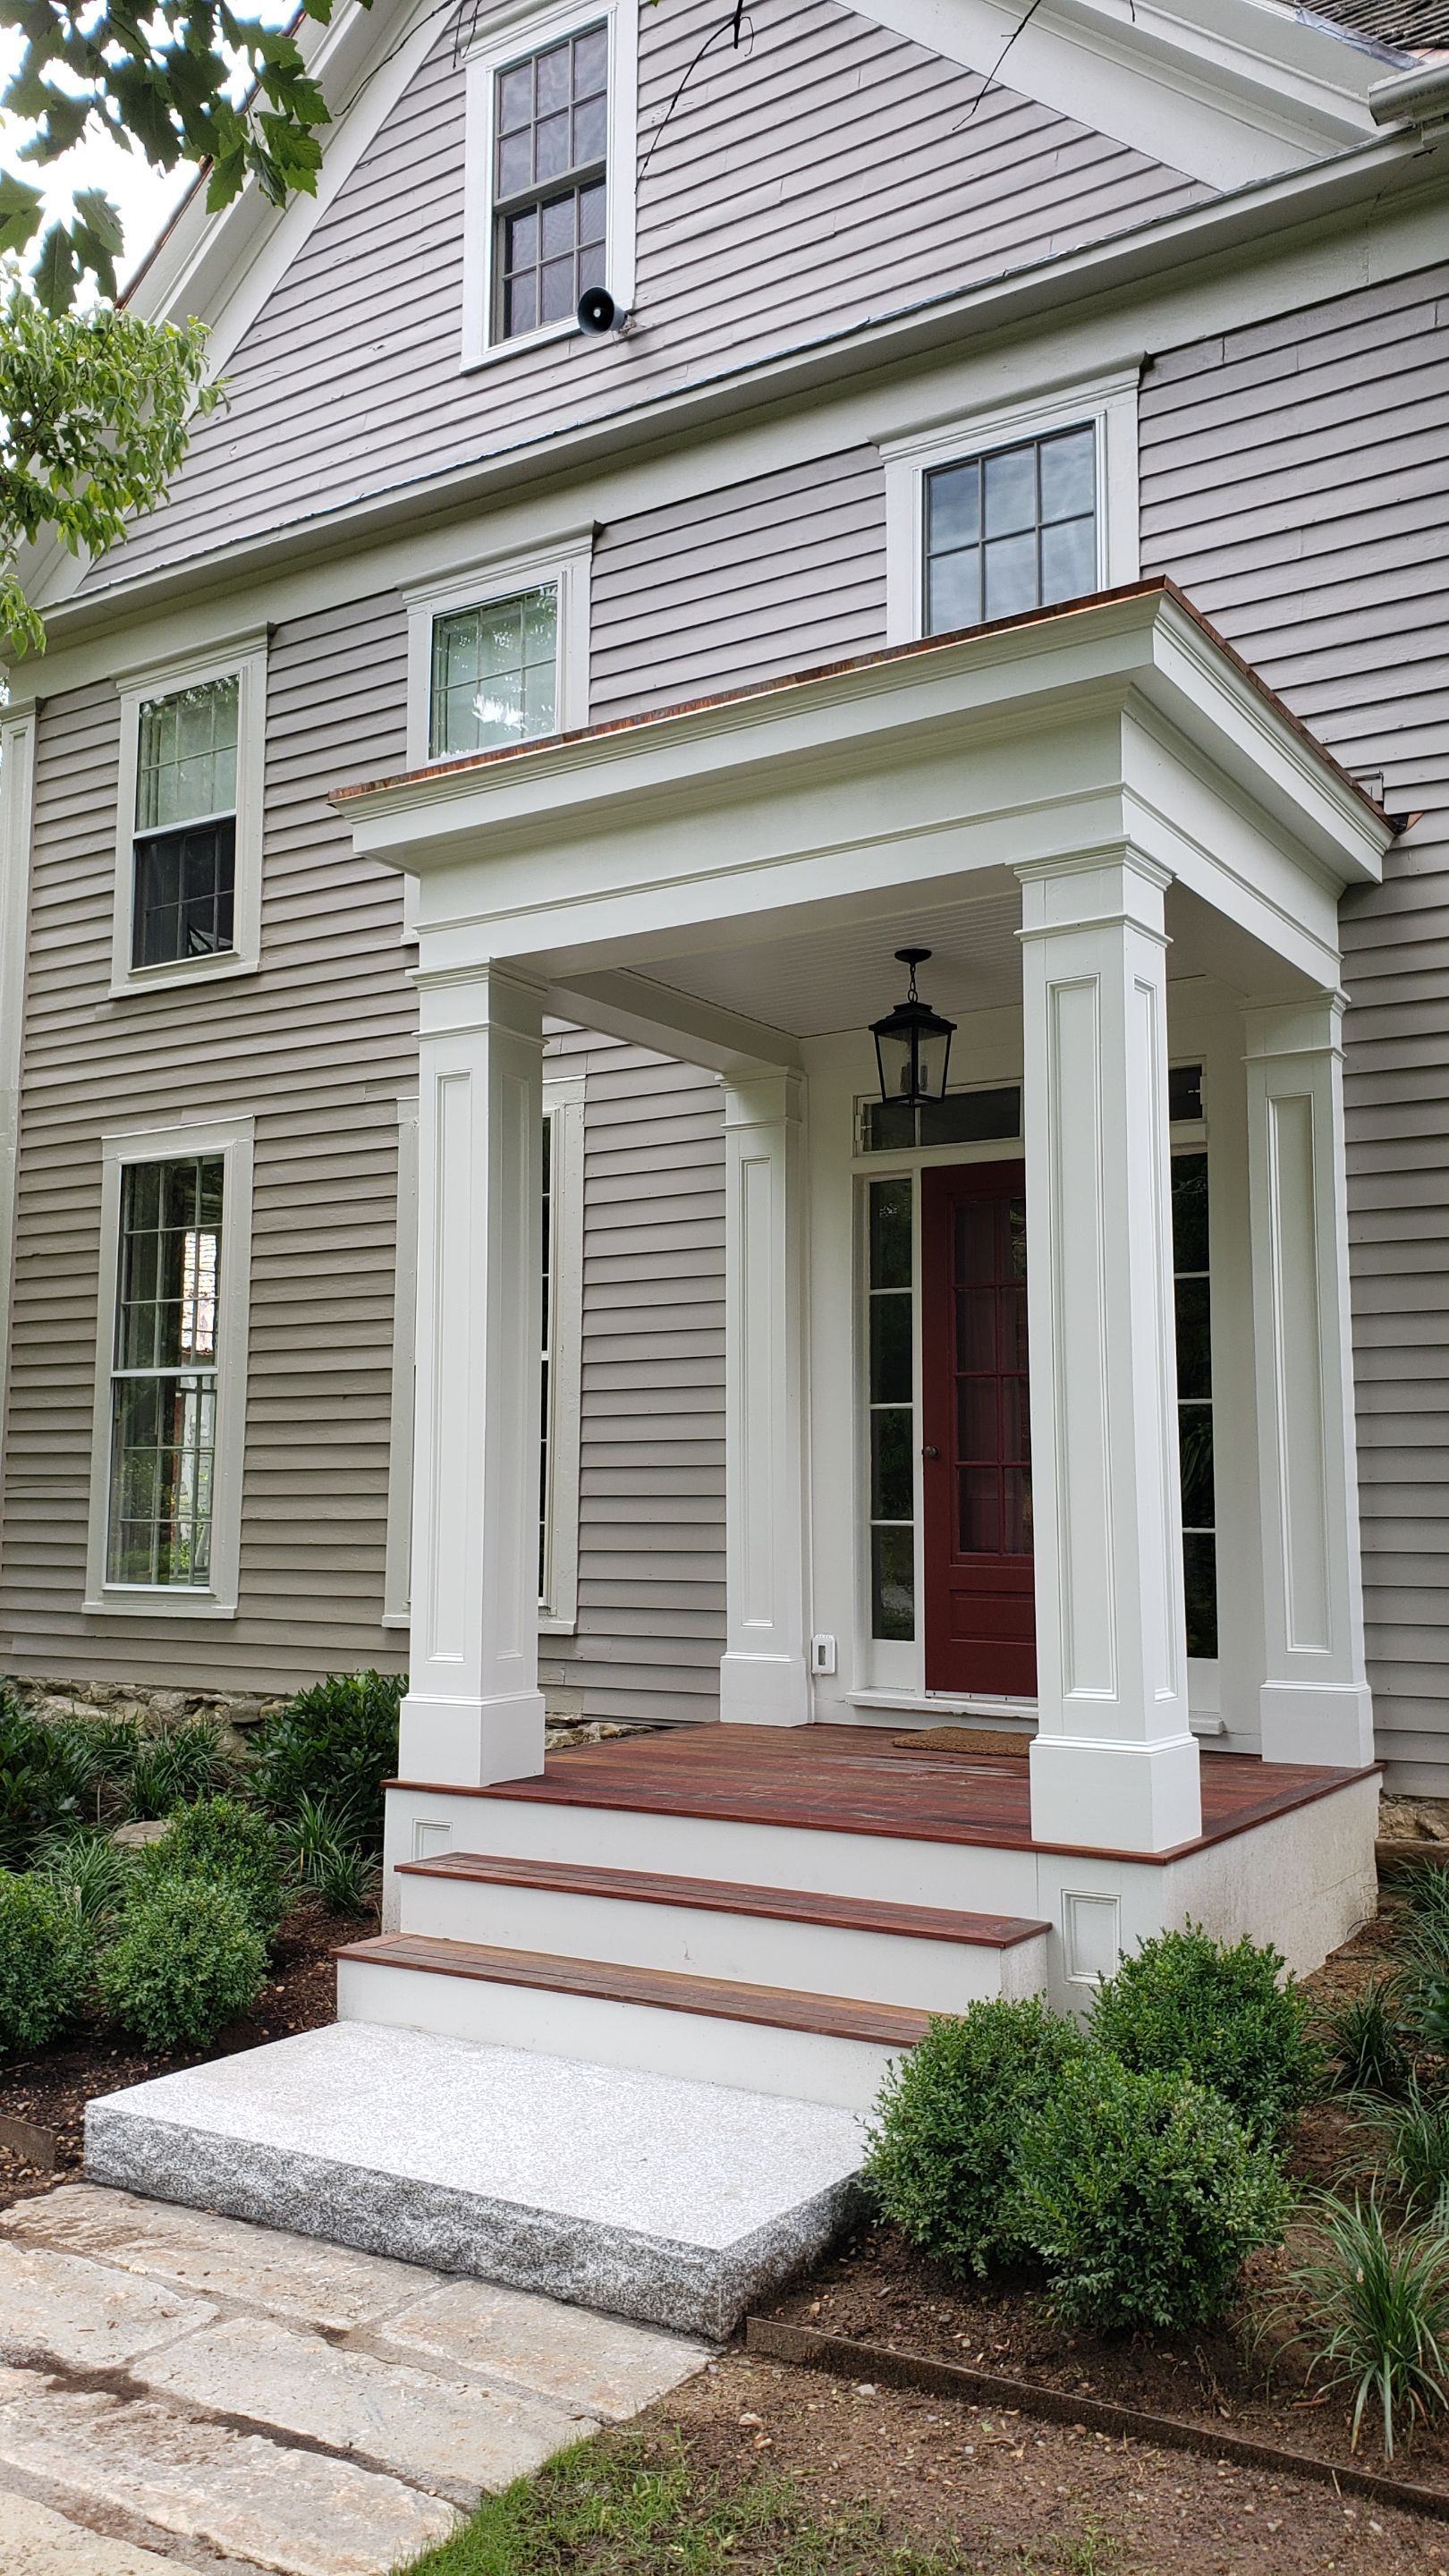 Photo of the Portico on Antique home with Greek Revival Style Detailing